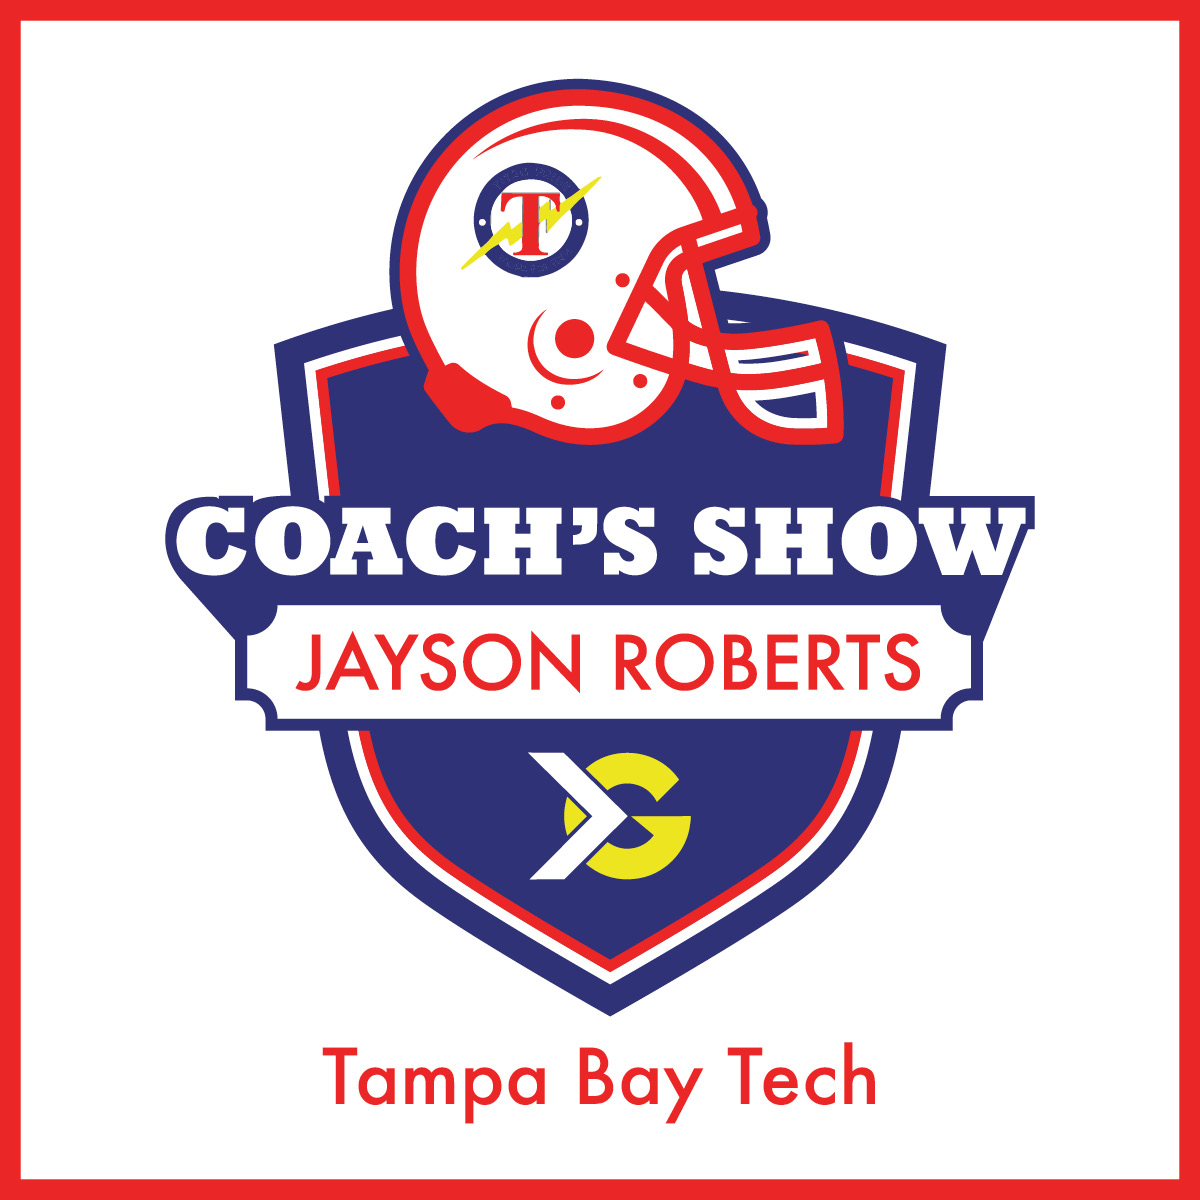 Tampa Bay Tech Football Coach's Show With Jayson Roberts - ITG Next